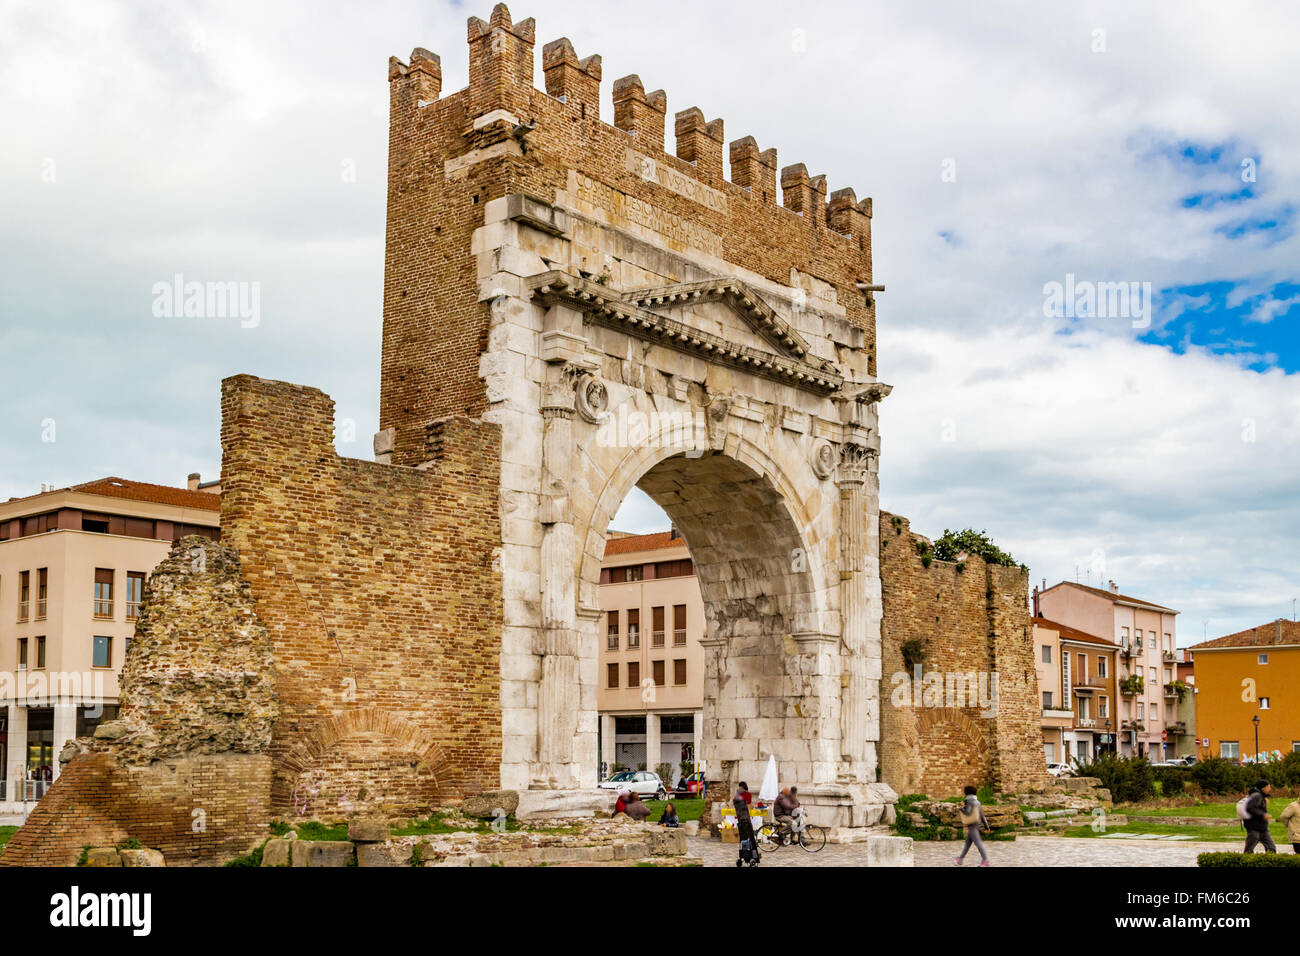 Arch of Augustus, an ancient Roman gateway to the city of Rimini in Italy Stock Photo